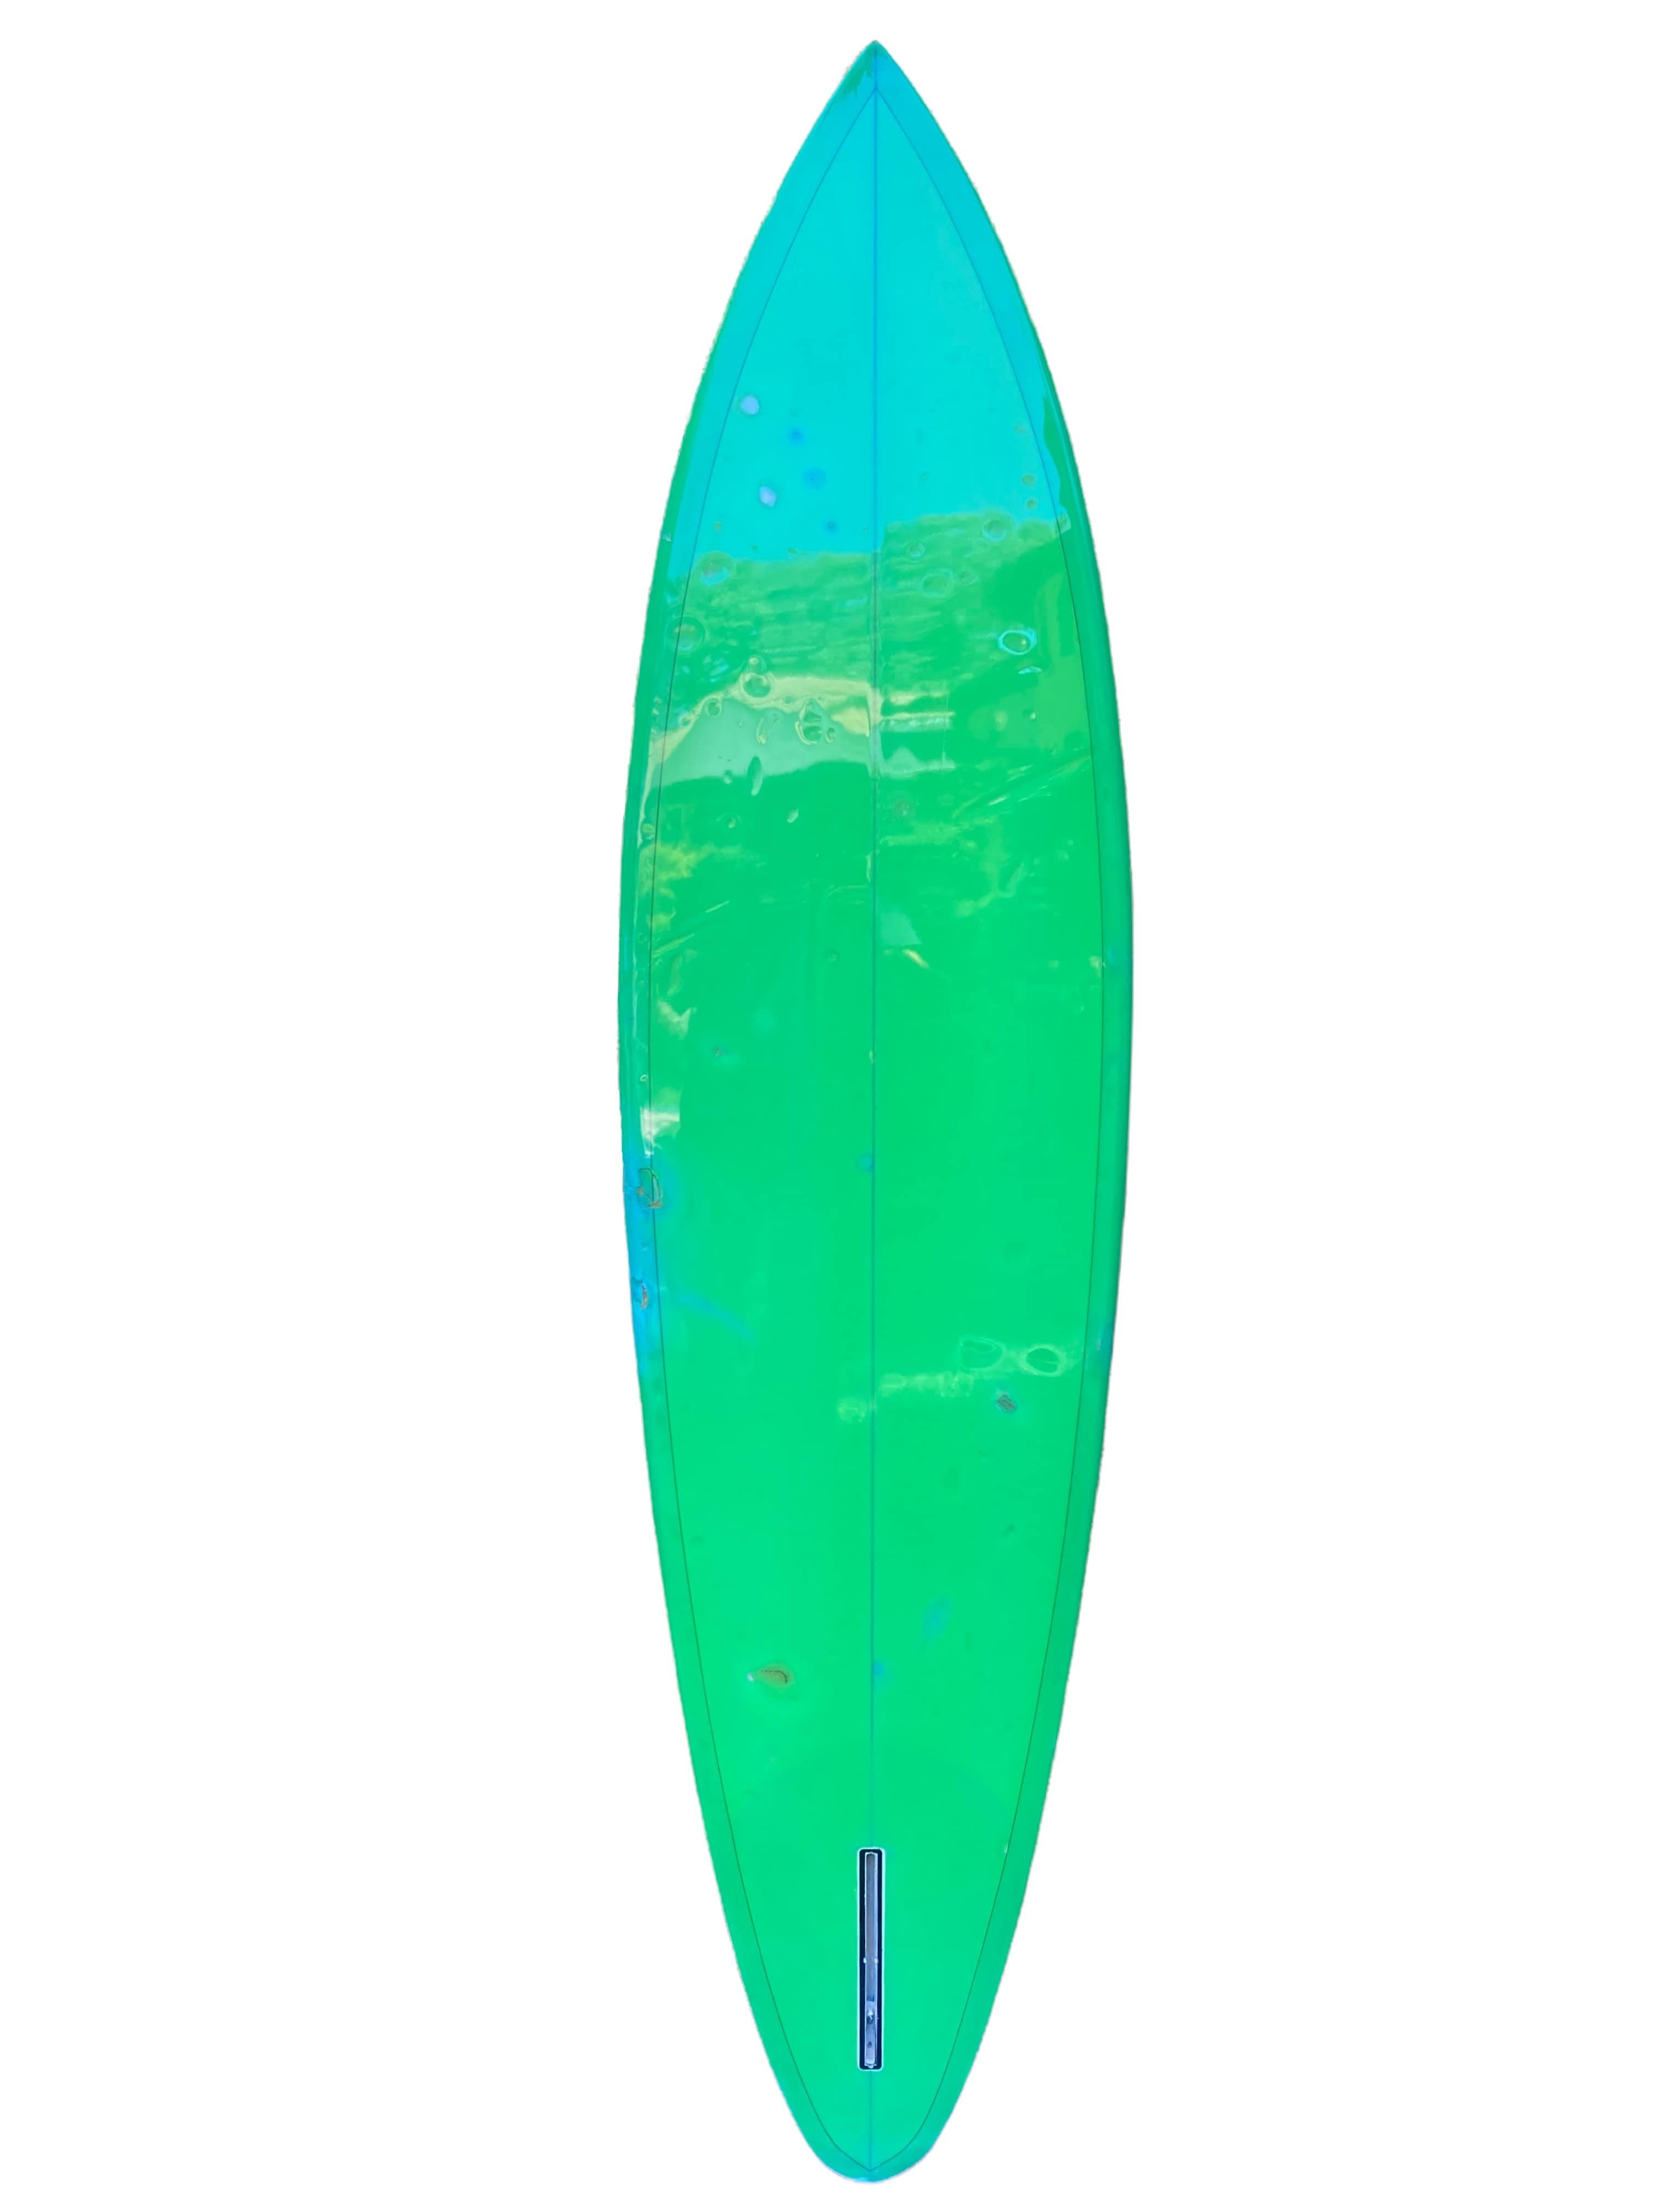 Mid-1970s Vintage Channel Islands single fin surfboard made by Al Merrick. Featuring a gorgeous bright blue tint with seafoam green bottom and wrapped rails. A great example of an all original 1970s surfboard hand shaped by one of the most